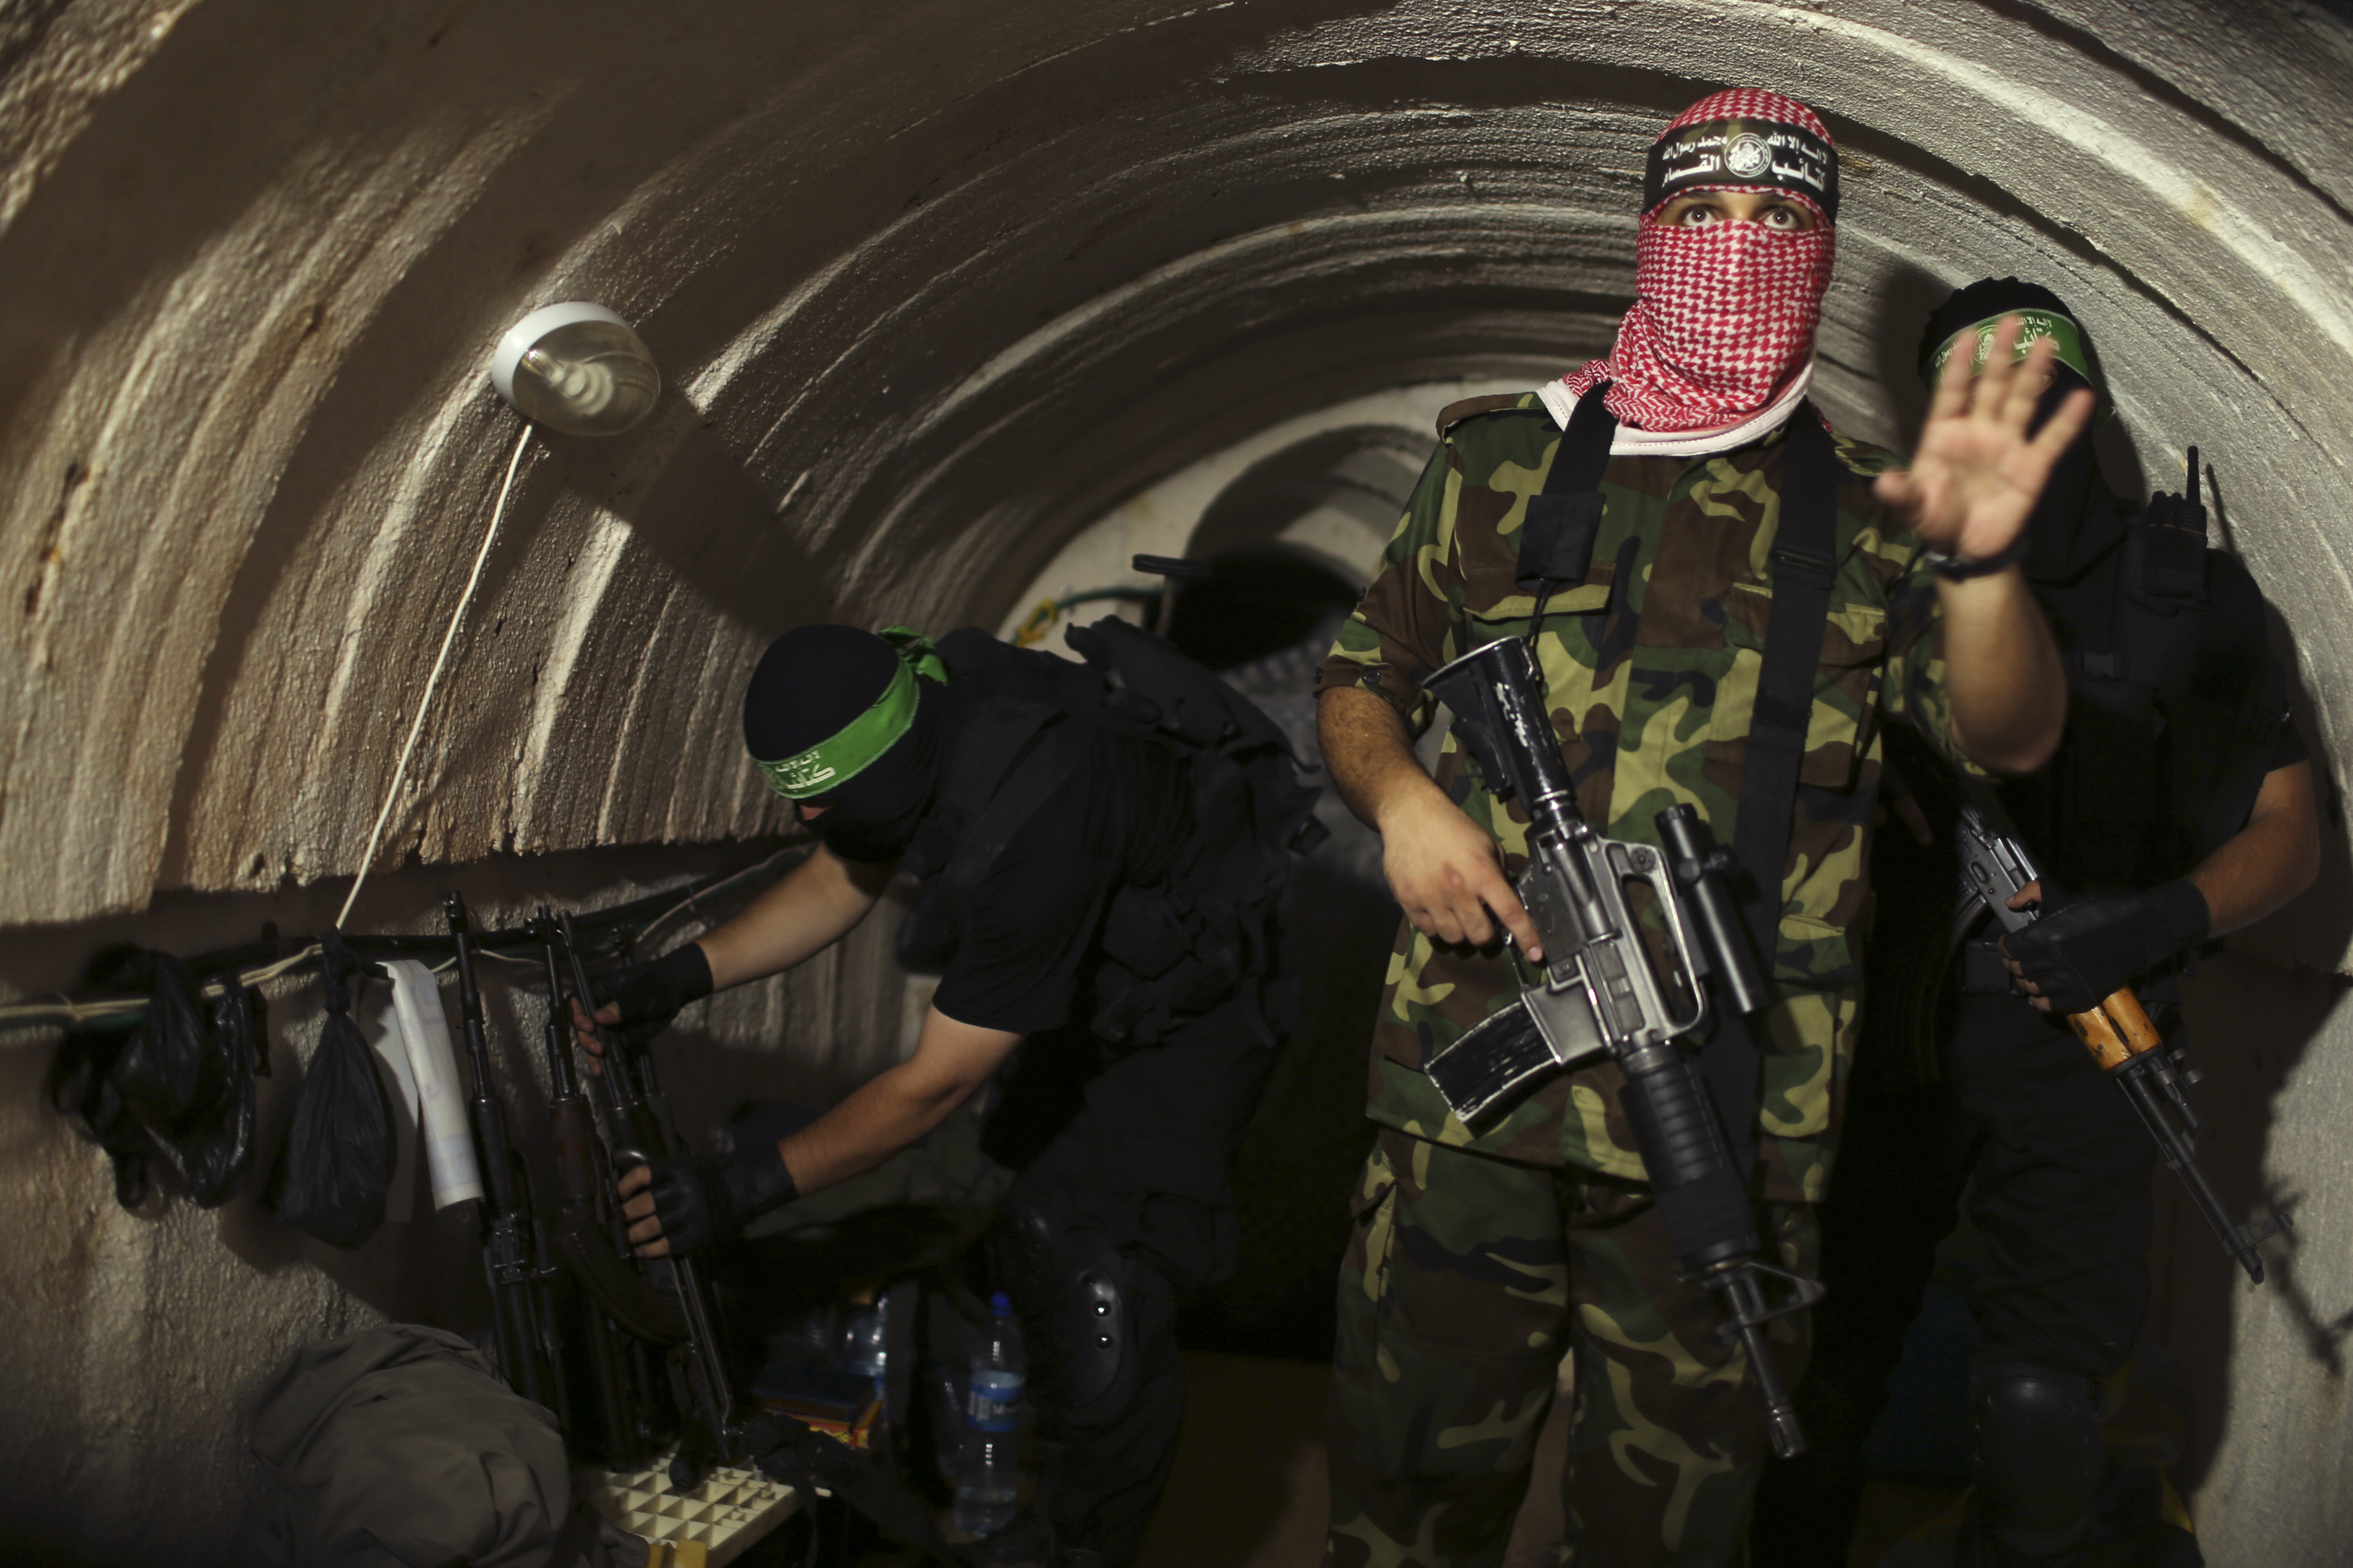 A Palestinian fighter from the Izz el-Deen al-Qassam Brigades, the armed wing of the Hamas movement, gestures inside an underground tunnel in Gaza Aug, 18, 2014. (Mohammed Salem—Reuters)